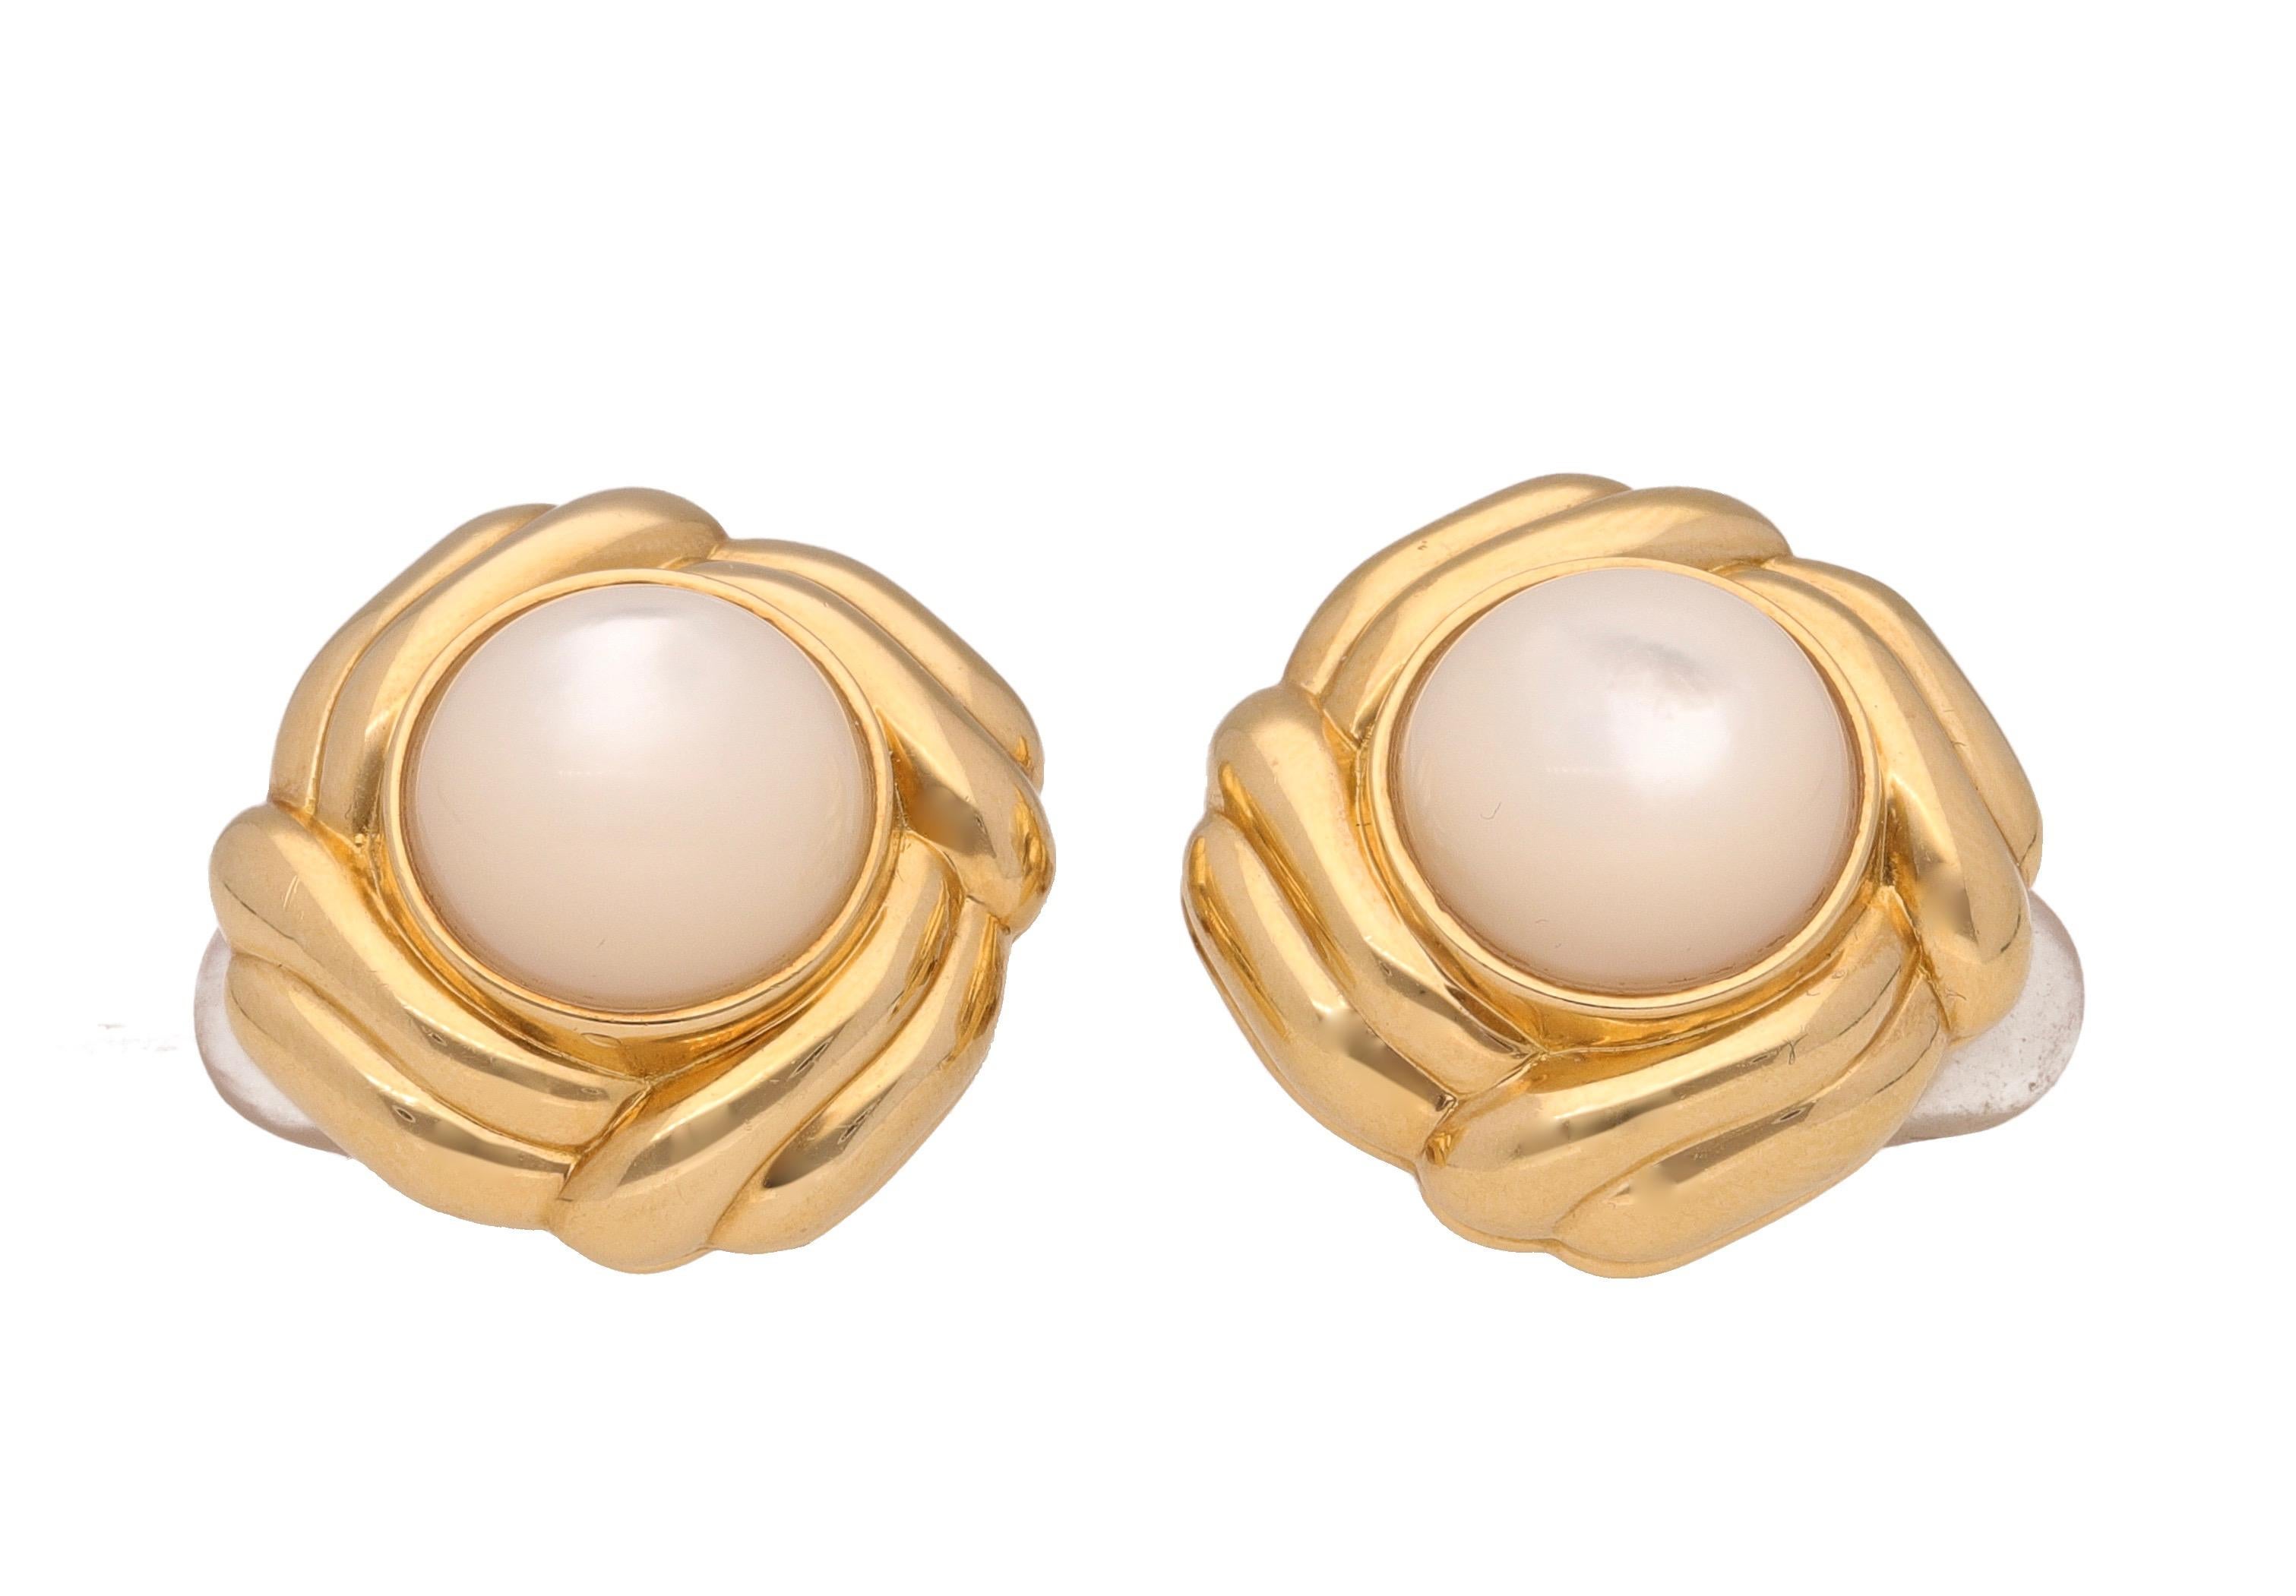 18 Kt. Yellow Gold earrings by David Webb with Mabe Pearls.
This stylish and elegant pair of earrings are from 1980 ca.